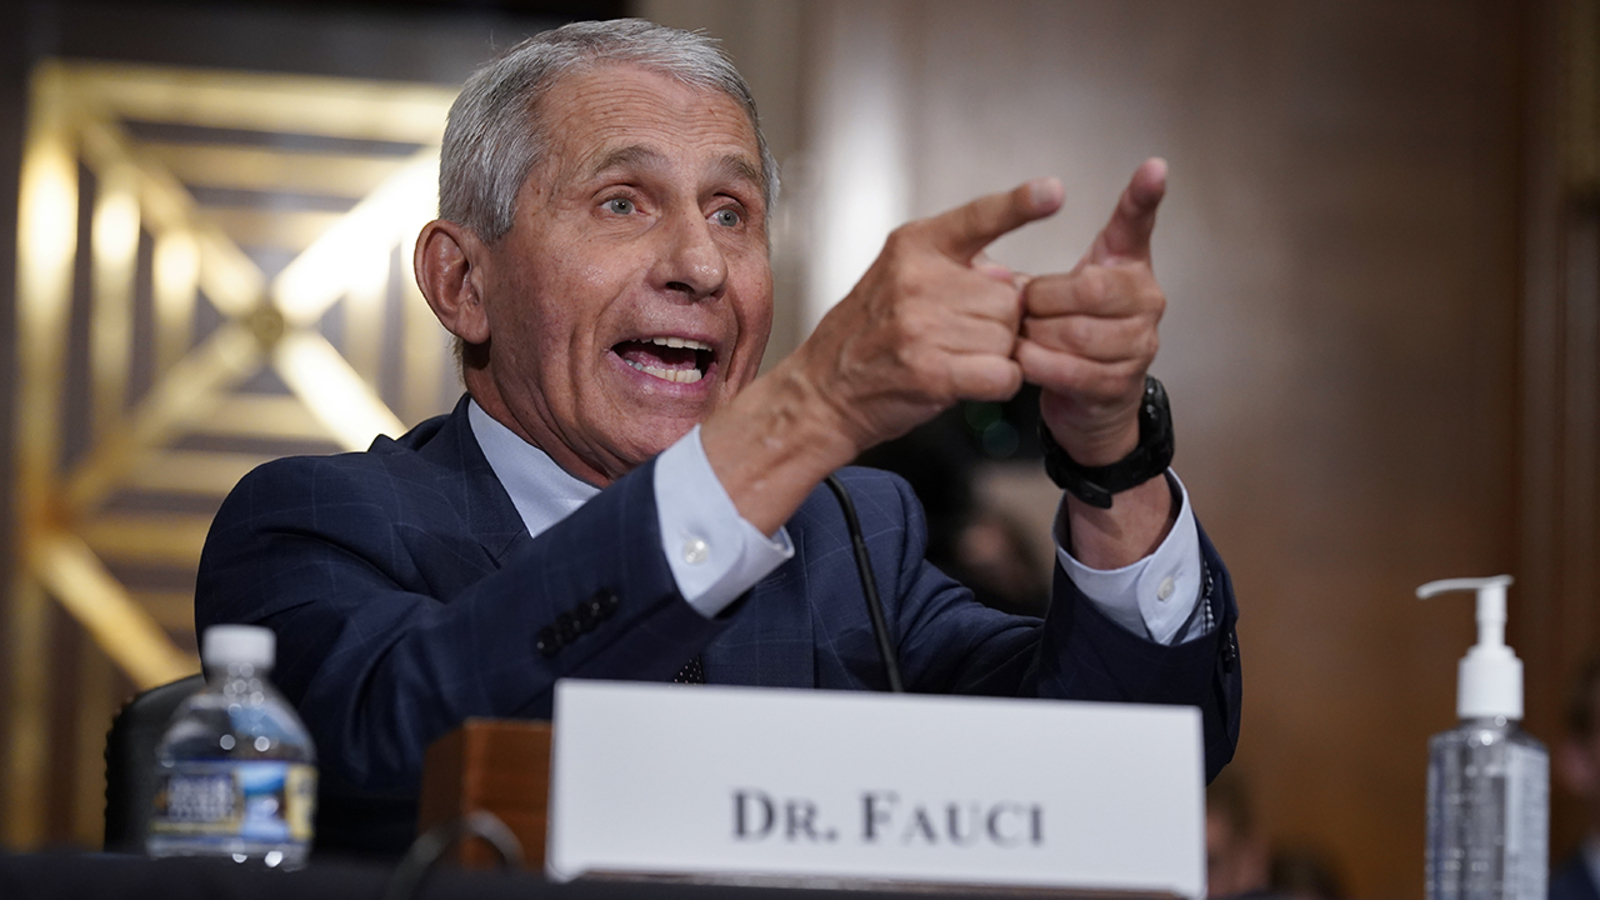 Dr. Fauci, Rand Paul get in shouting match over Wuhan lab COVID research - ABC7 Chicago